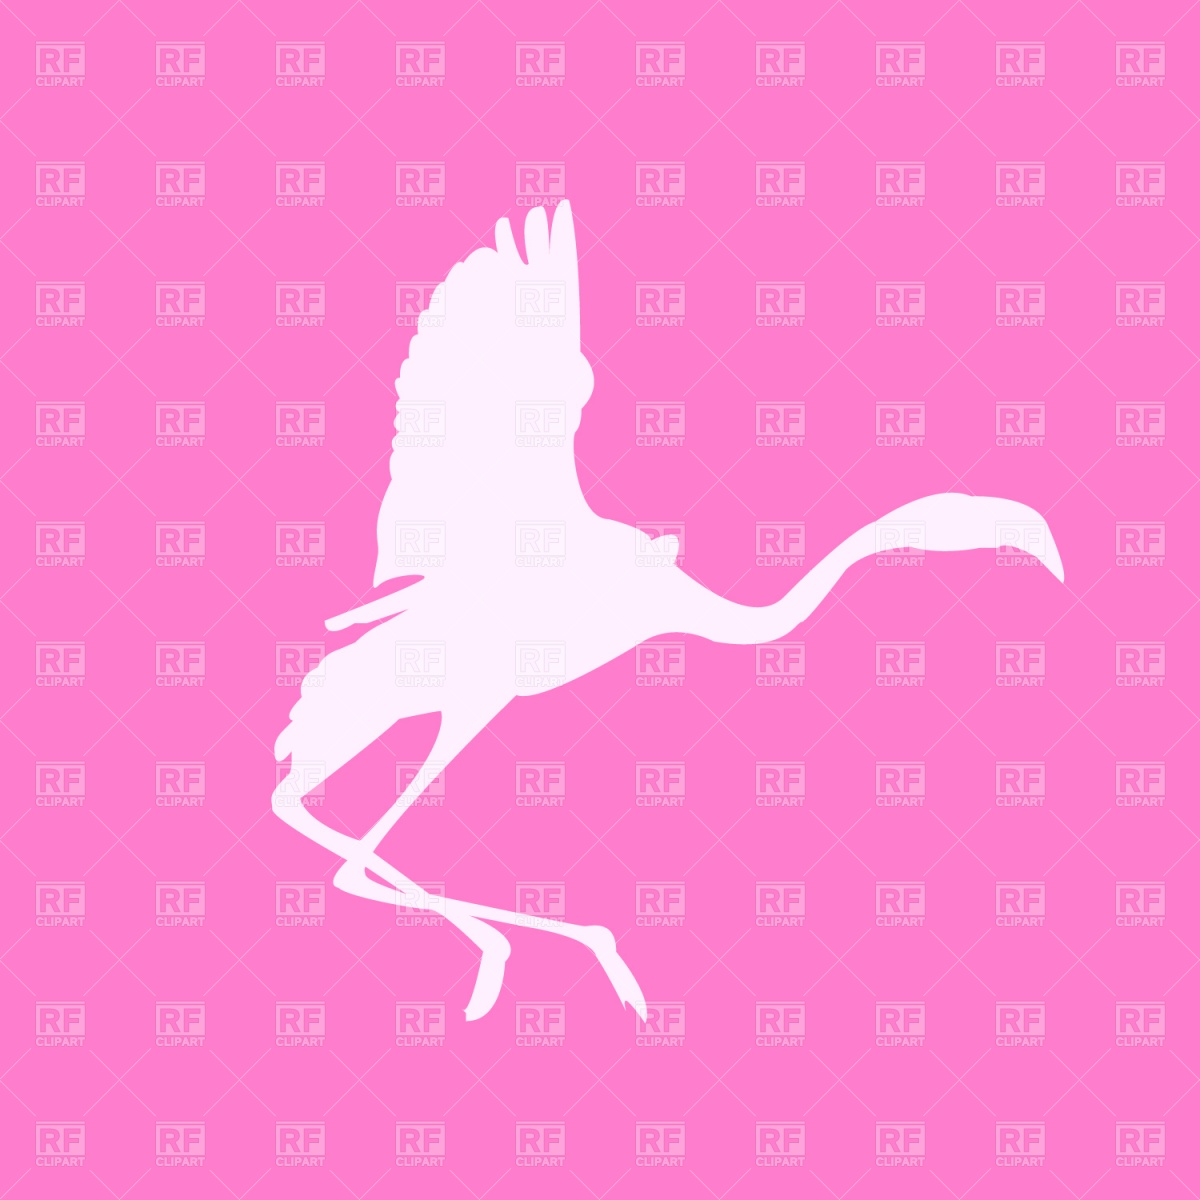 Flamingo Silhouette Download Royalty Free Vector Clipart  Eps